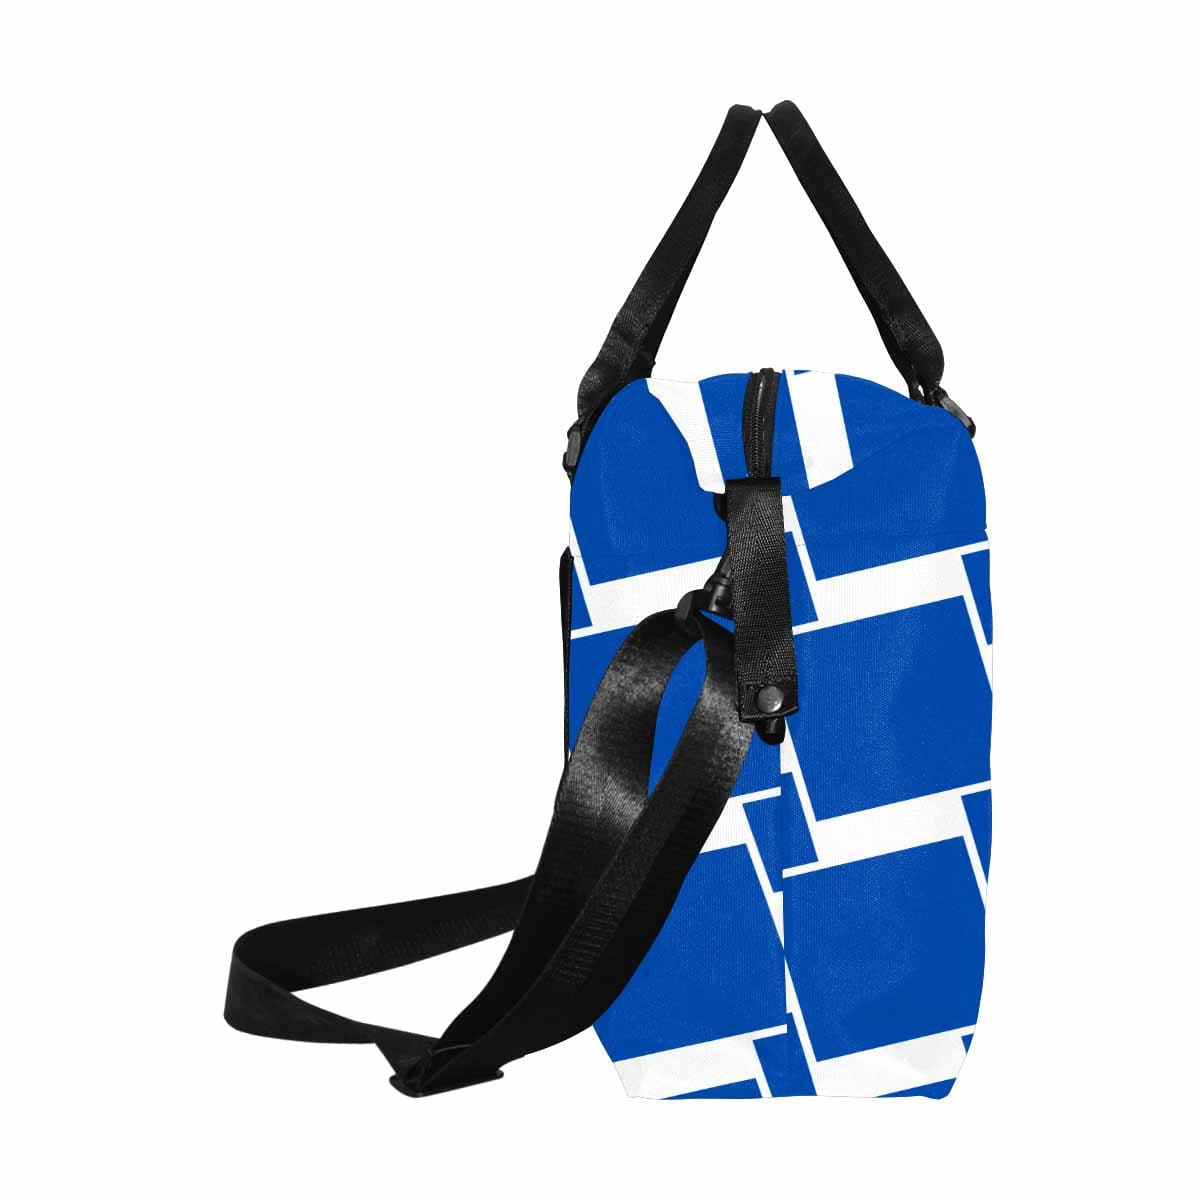 Duffle Bag - Large Capacity - Royal Blue - Bags | Travel Bags | Canvas Carry